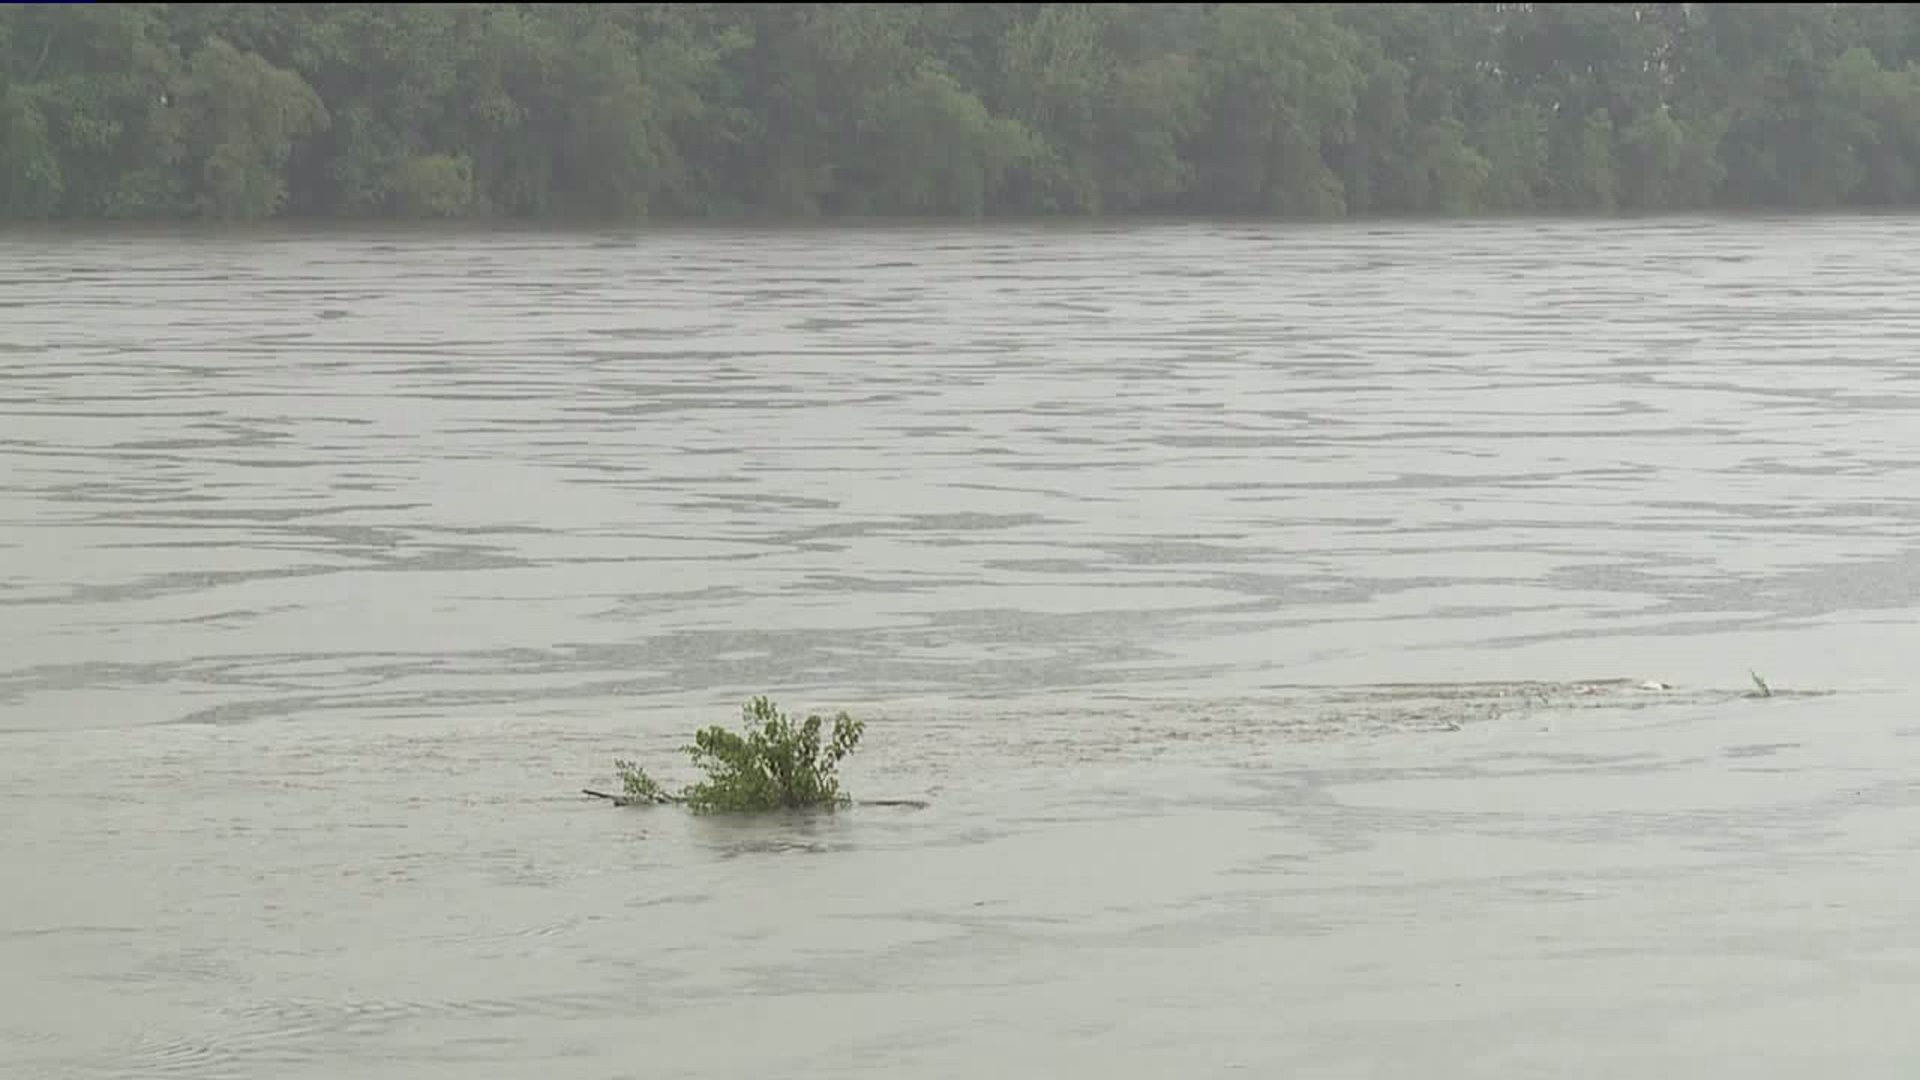 Fisherman Discovers Two Human Legs in Susquehanna River